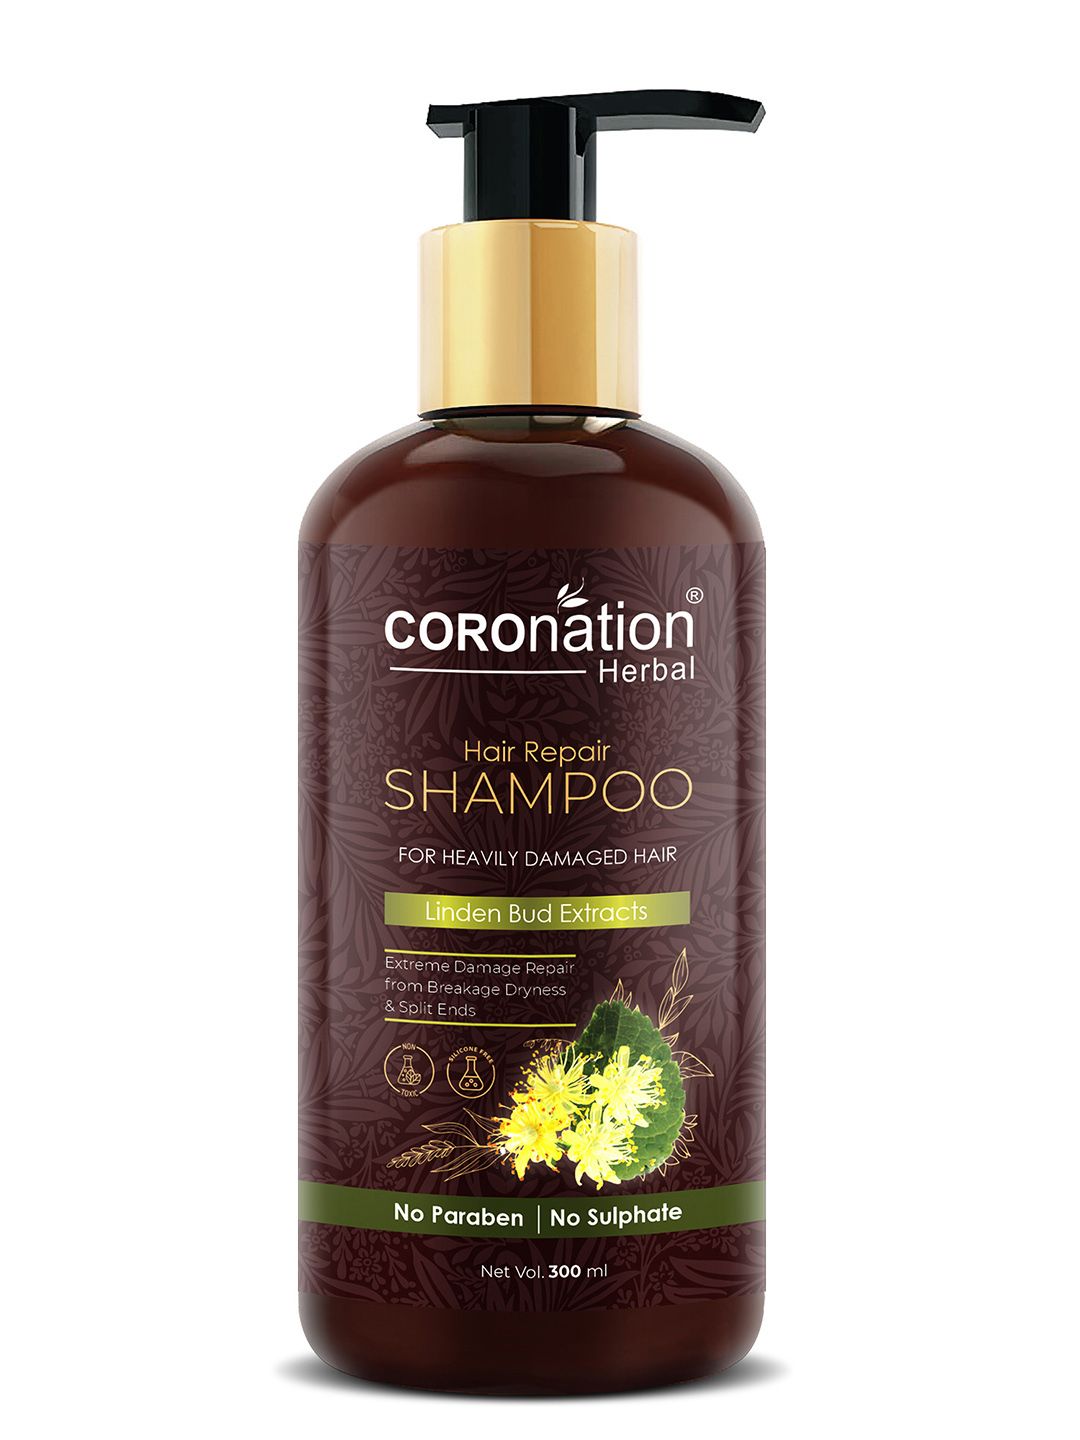 COROnation Herbal Hair Repair Shampoo with Linden Bud Extracts - 300ml Price in India